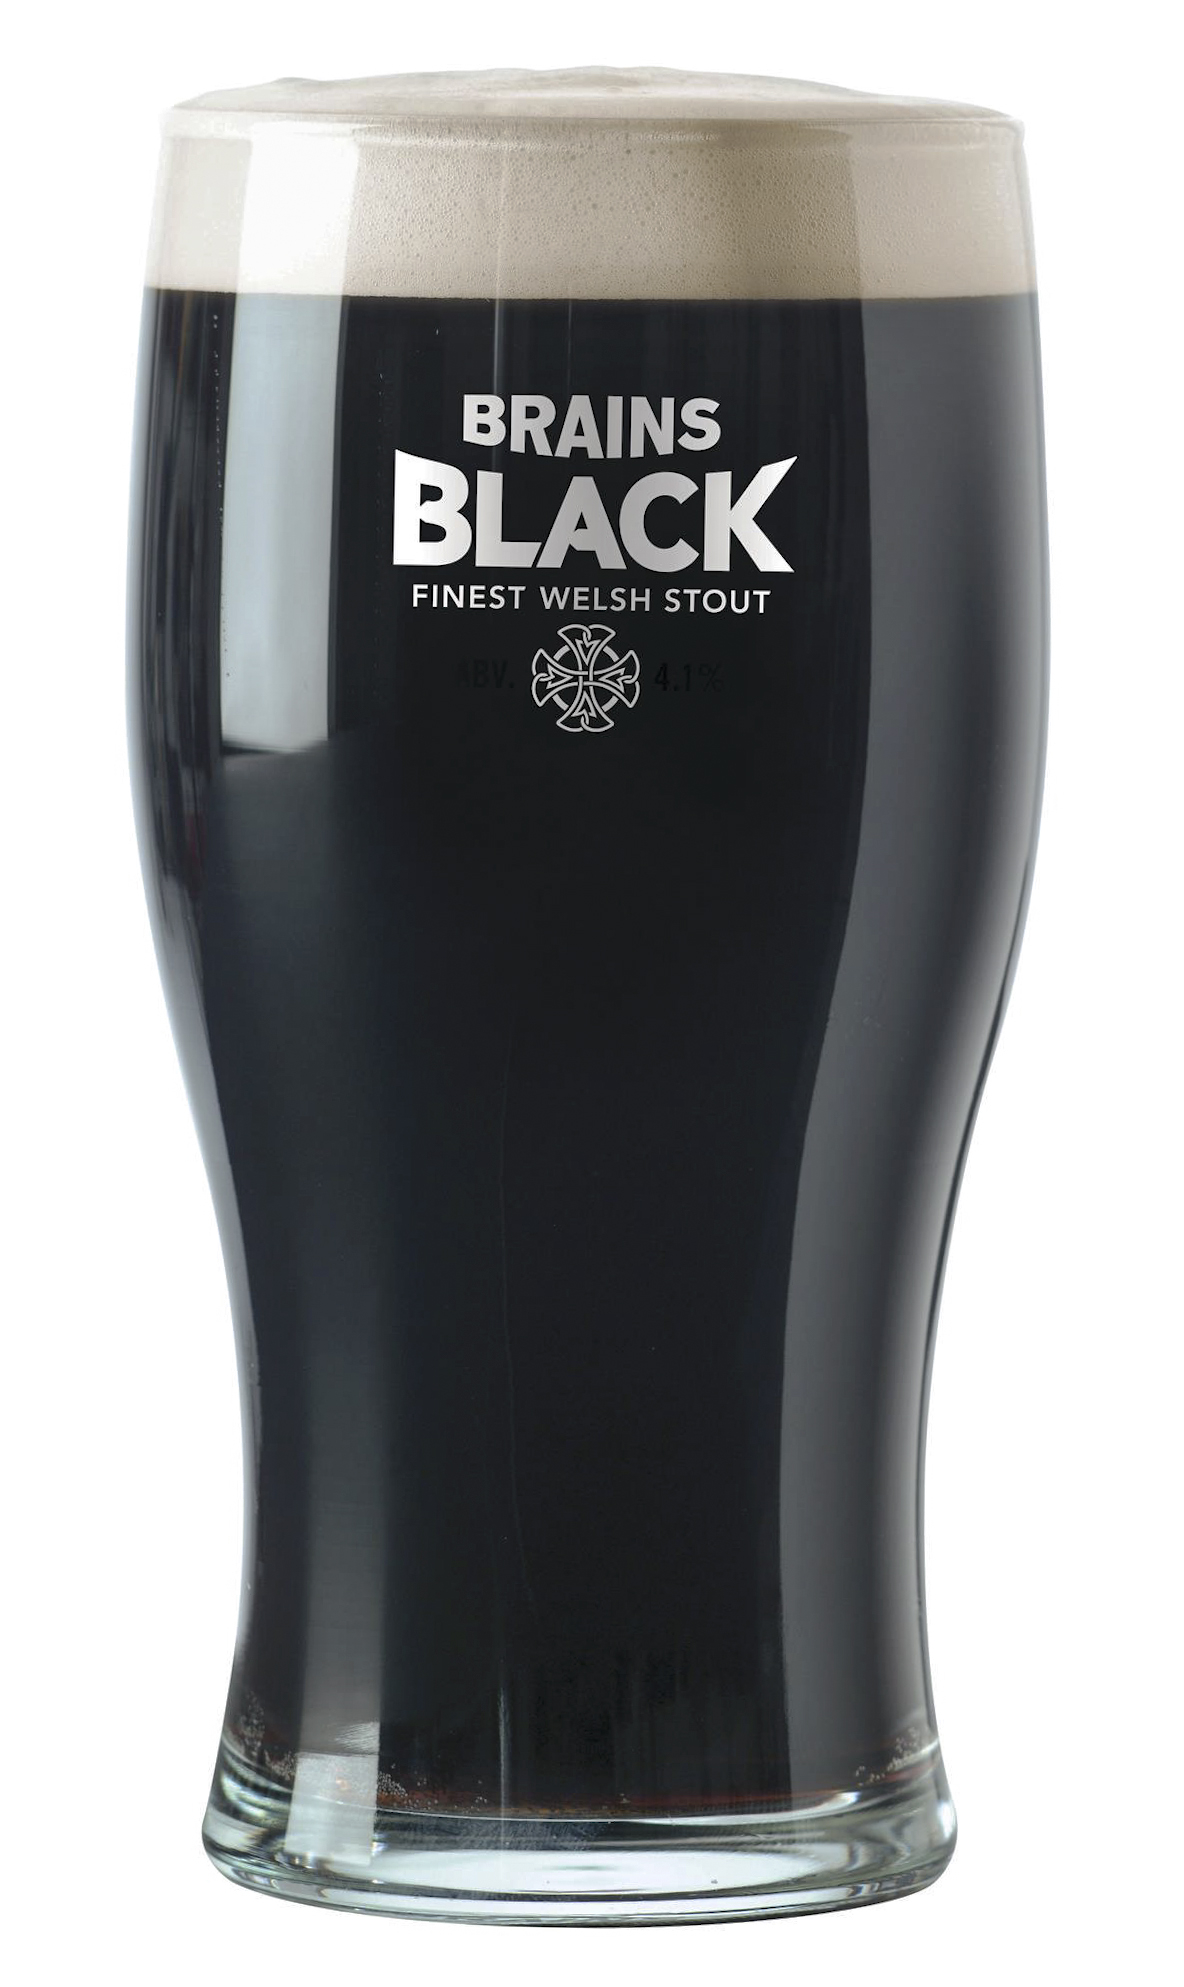 A pint of Brains Black, a new stout from Brains, regional brewery founded in 1882 in Cardiff, Wales. Photo: Handout